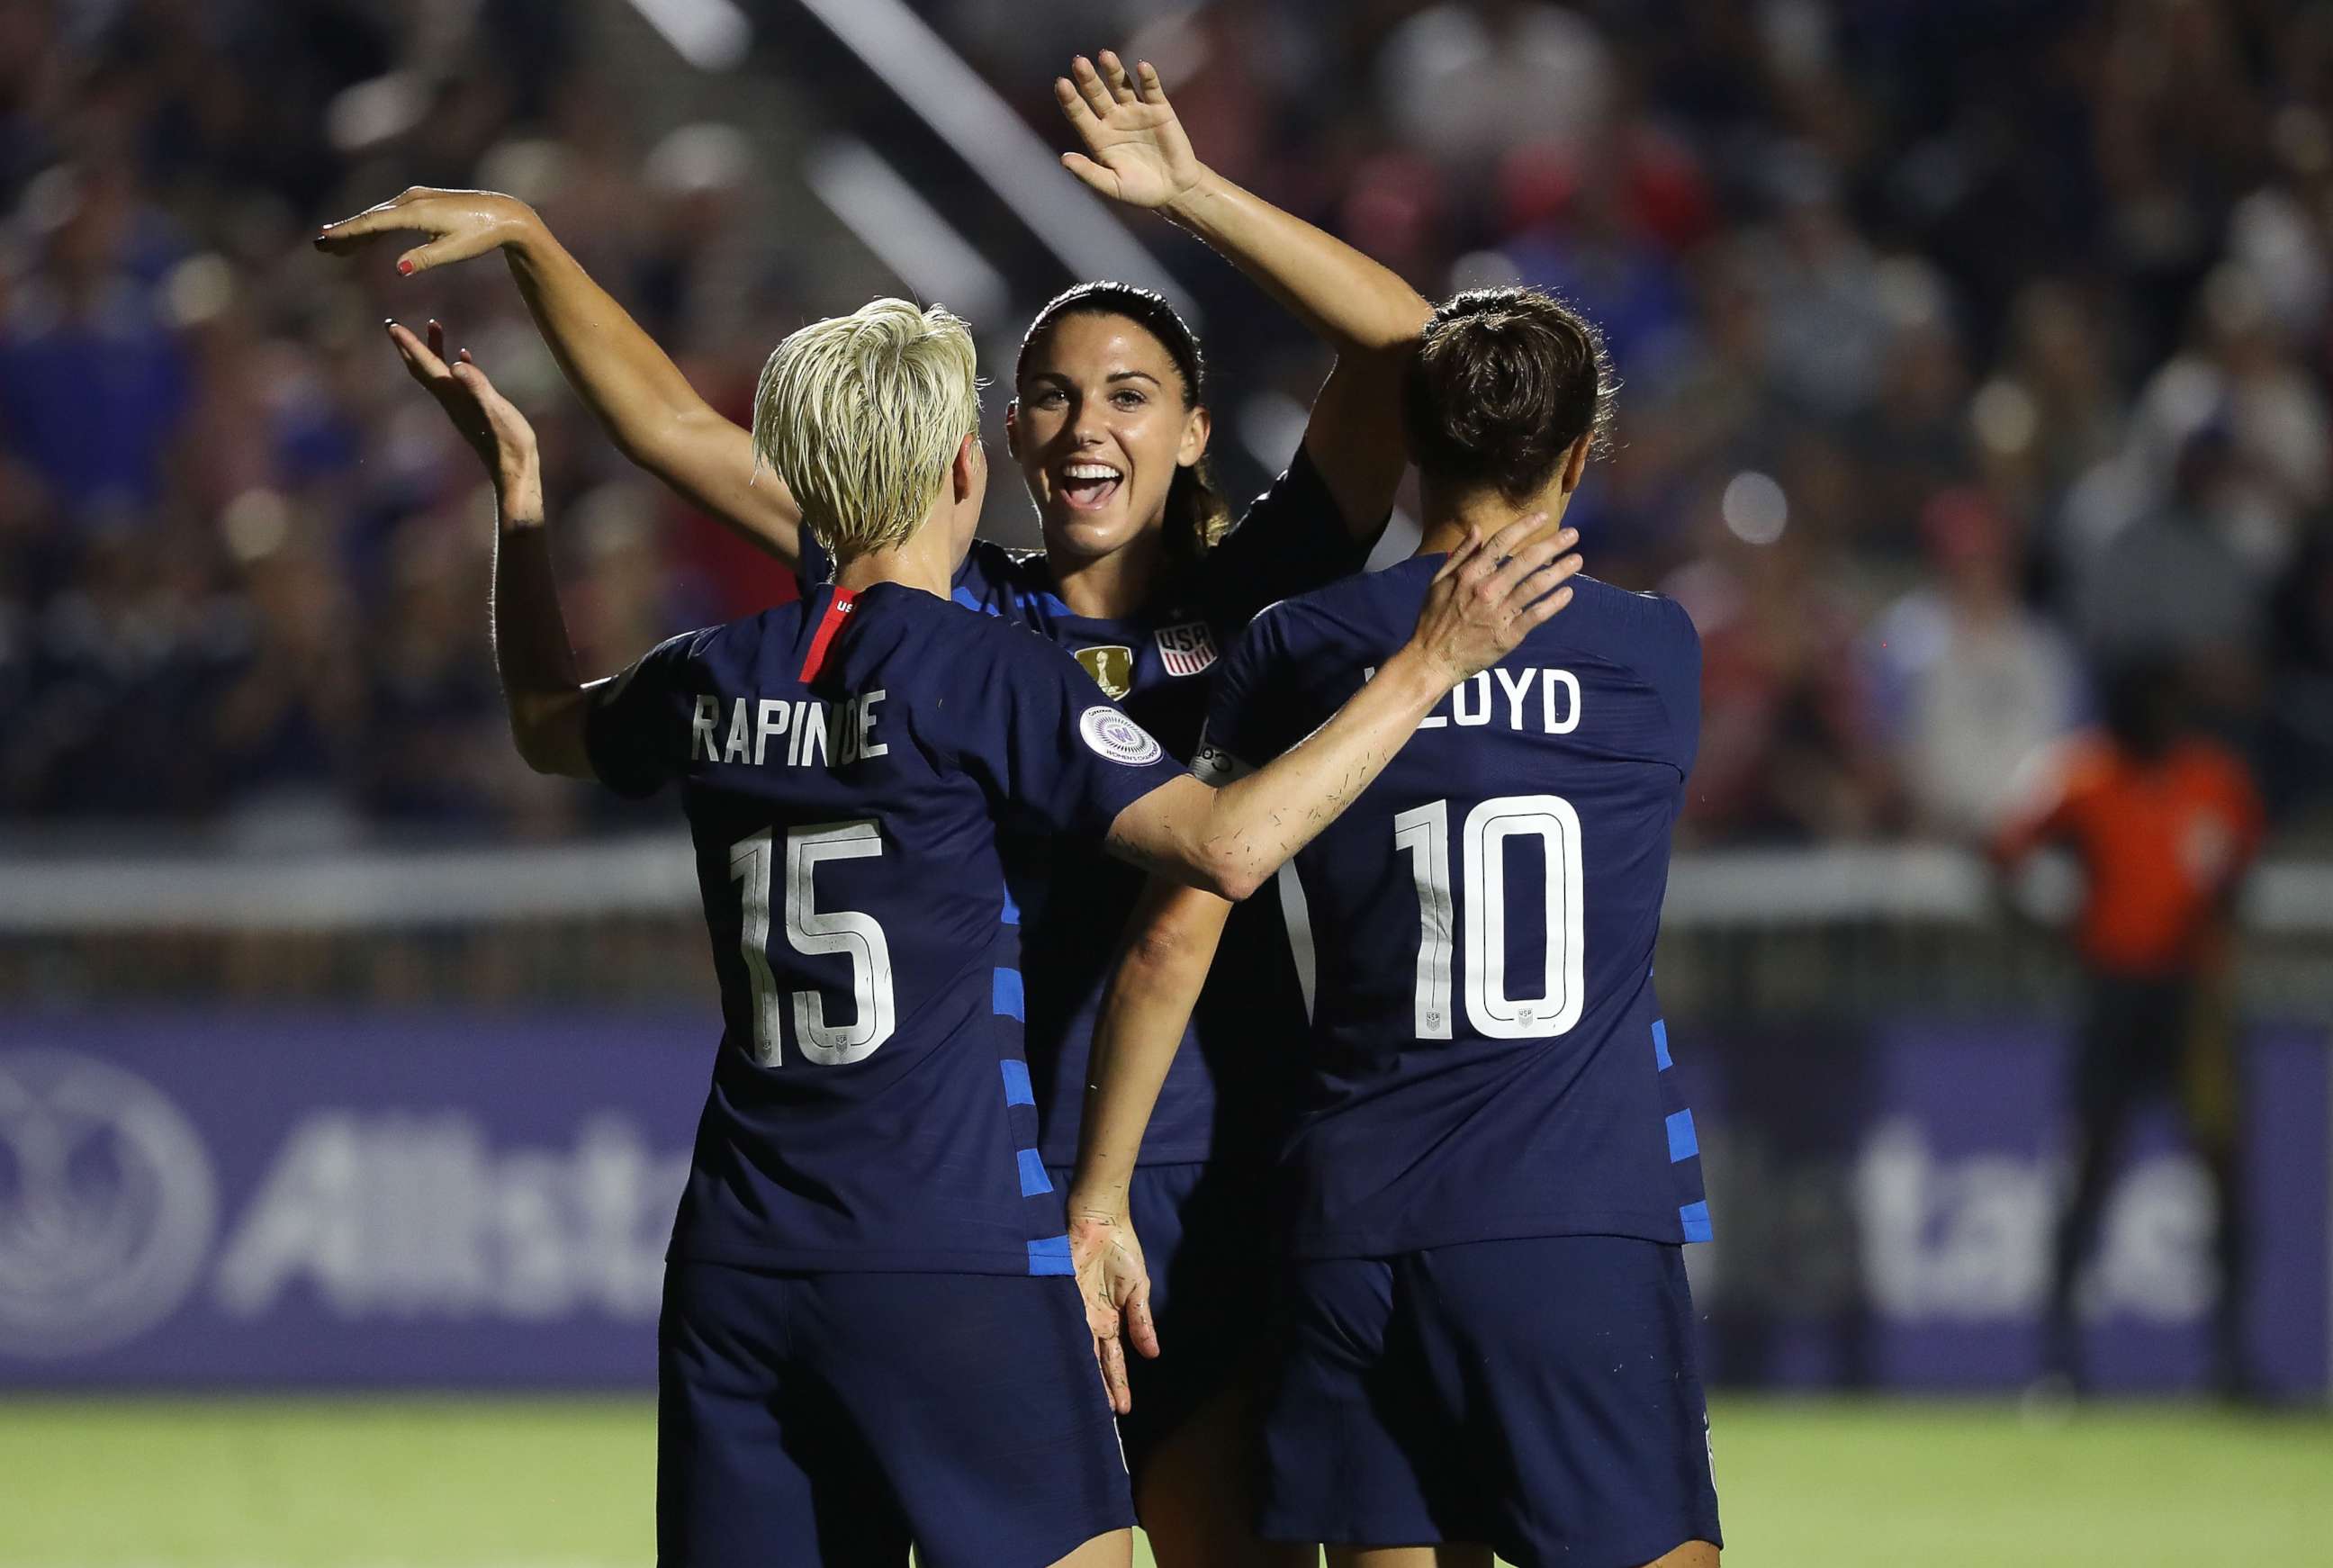 PHOTO: Megan Rapinoe reacts after scoring a goal as she celebrates with teammates Alex Morgan and Carli Lloyd of USA against Mexico, Oct. 4, 2018 in Cary, N.C.